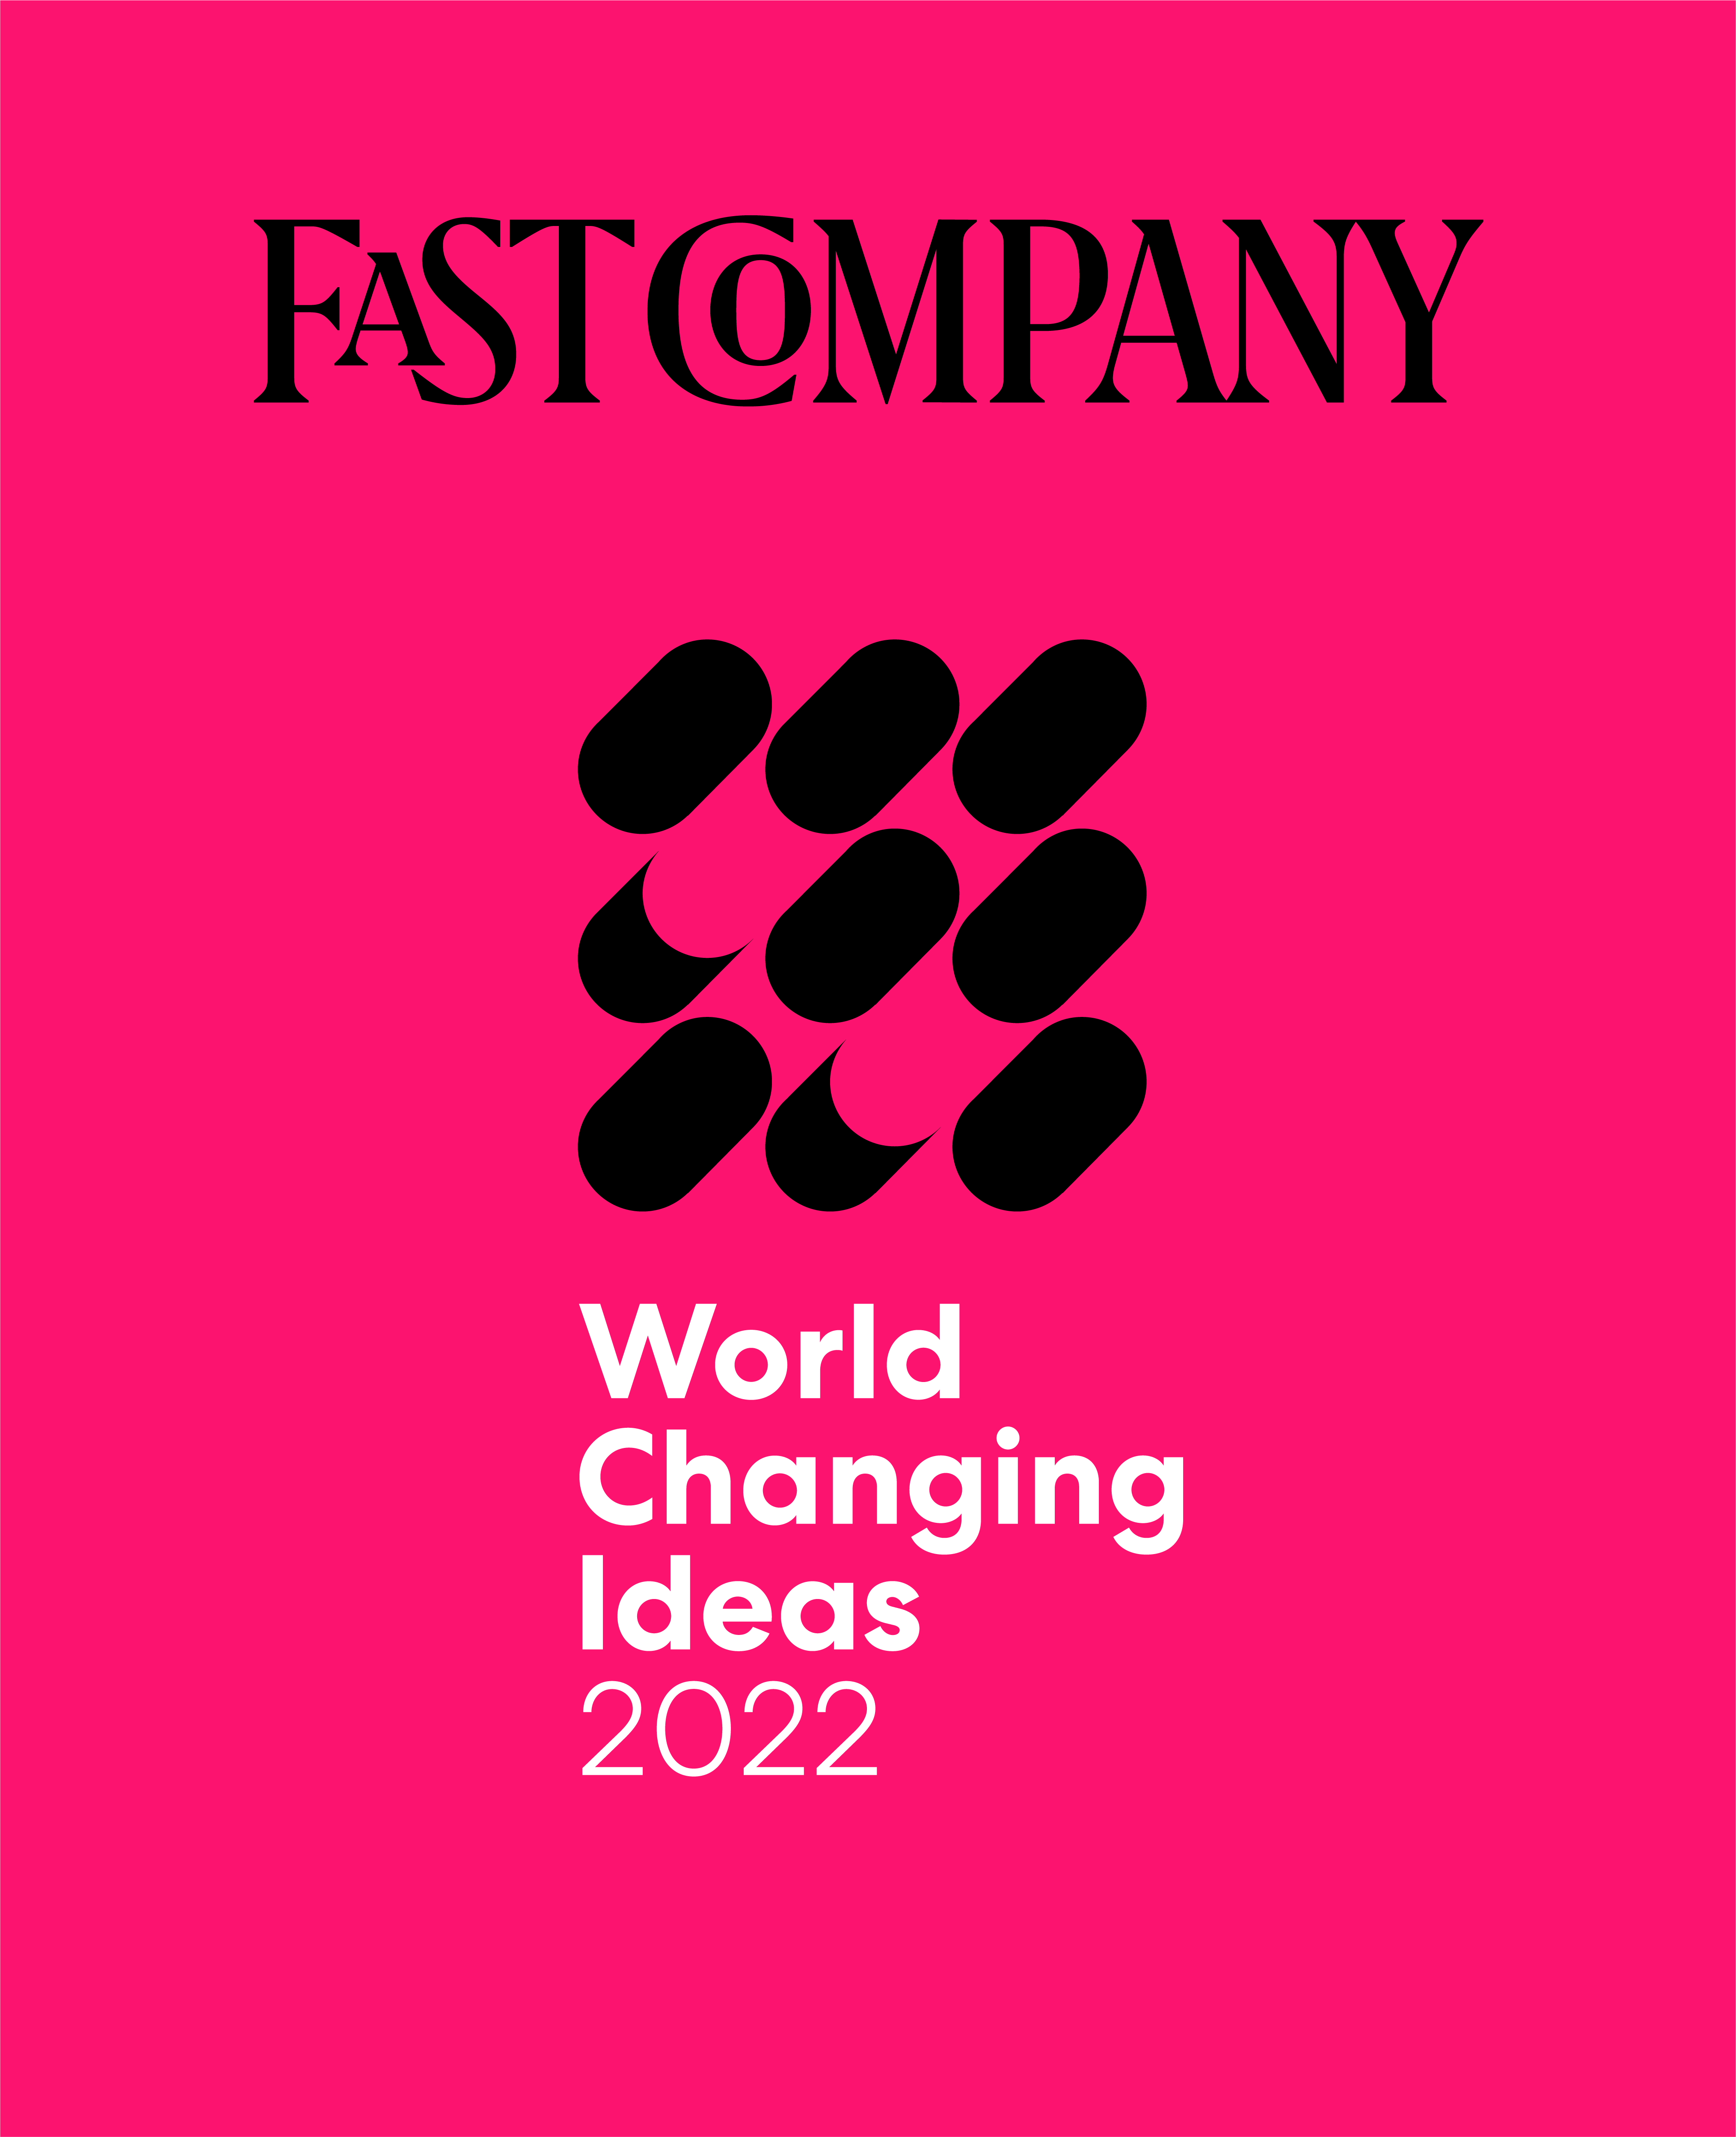 Fast Company World Changing Ideas in 2022